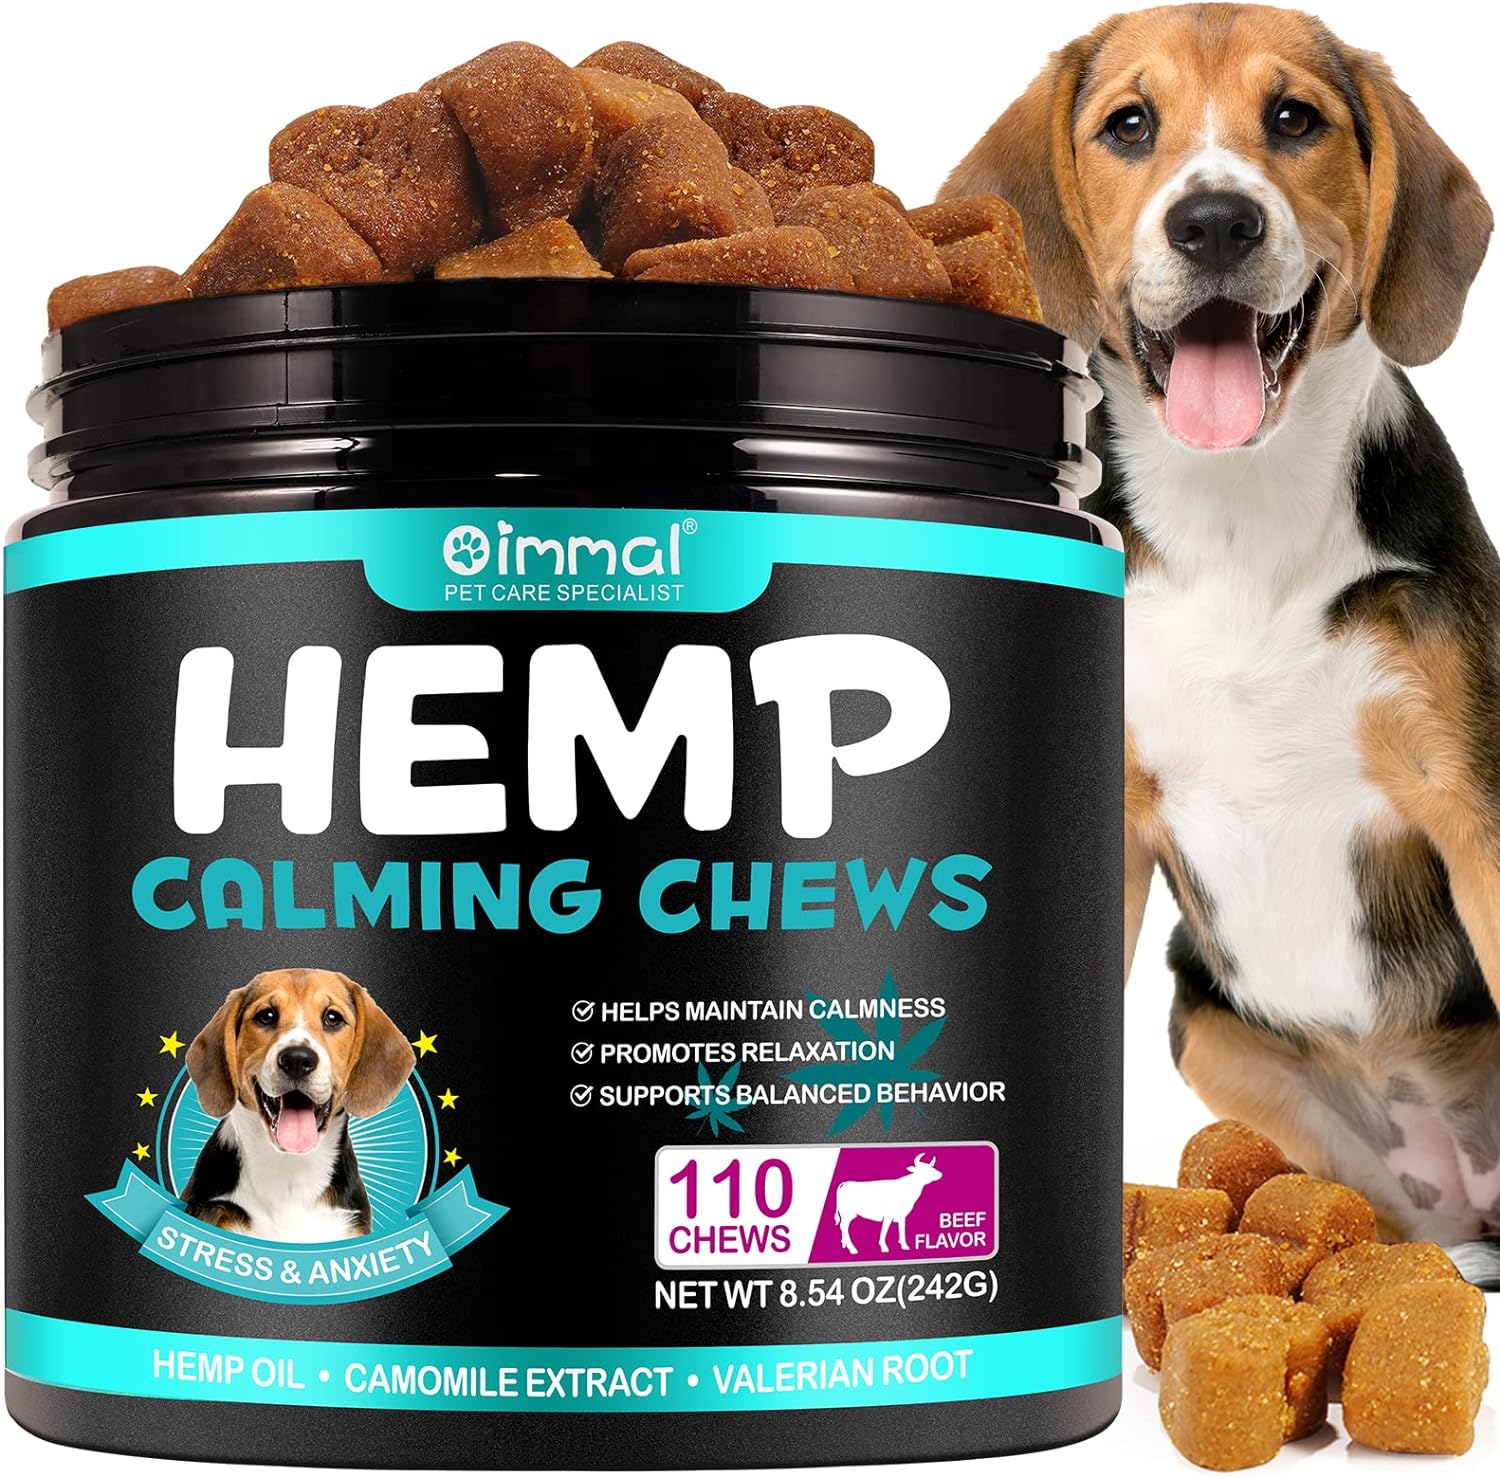 Hemp Calming Chews for Dogs, 110 Chews Beef Dog Calming Treats Anxiety Relief 100% Golden Ratio of Natural Ingredients Calming Dog Treats, Aid with Separation, Barking, Stress Relief, Thunderstorms